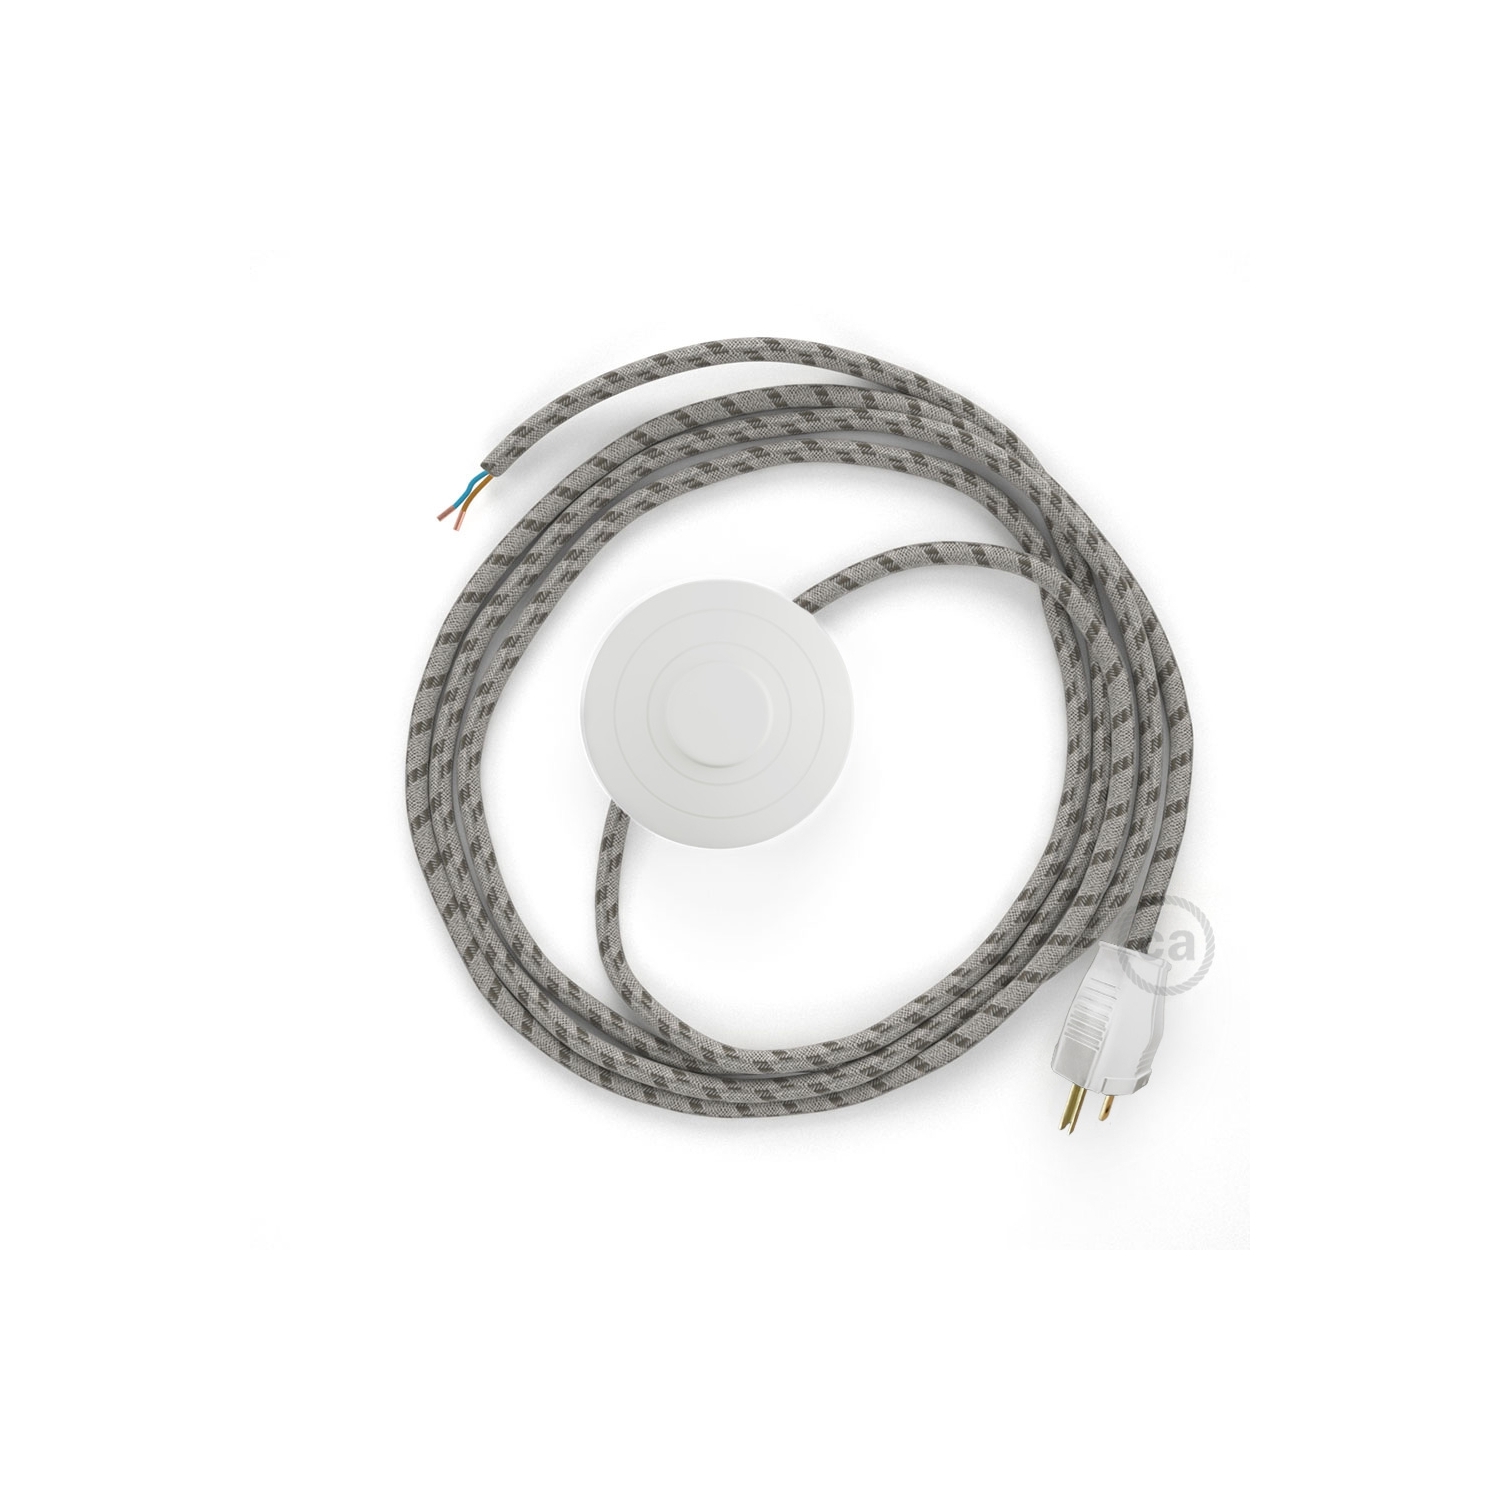 Power Cord with foot switch, RD53 Natural & Brown Linen Stripe - Choose color of switch/plug